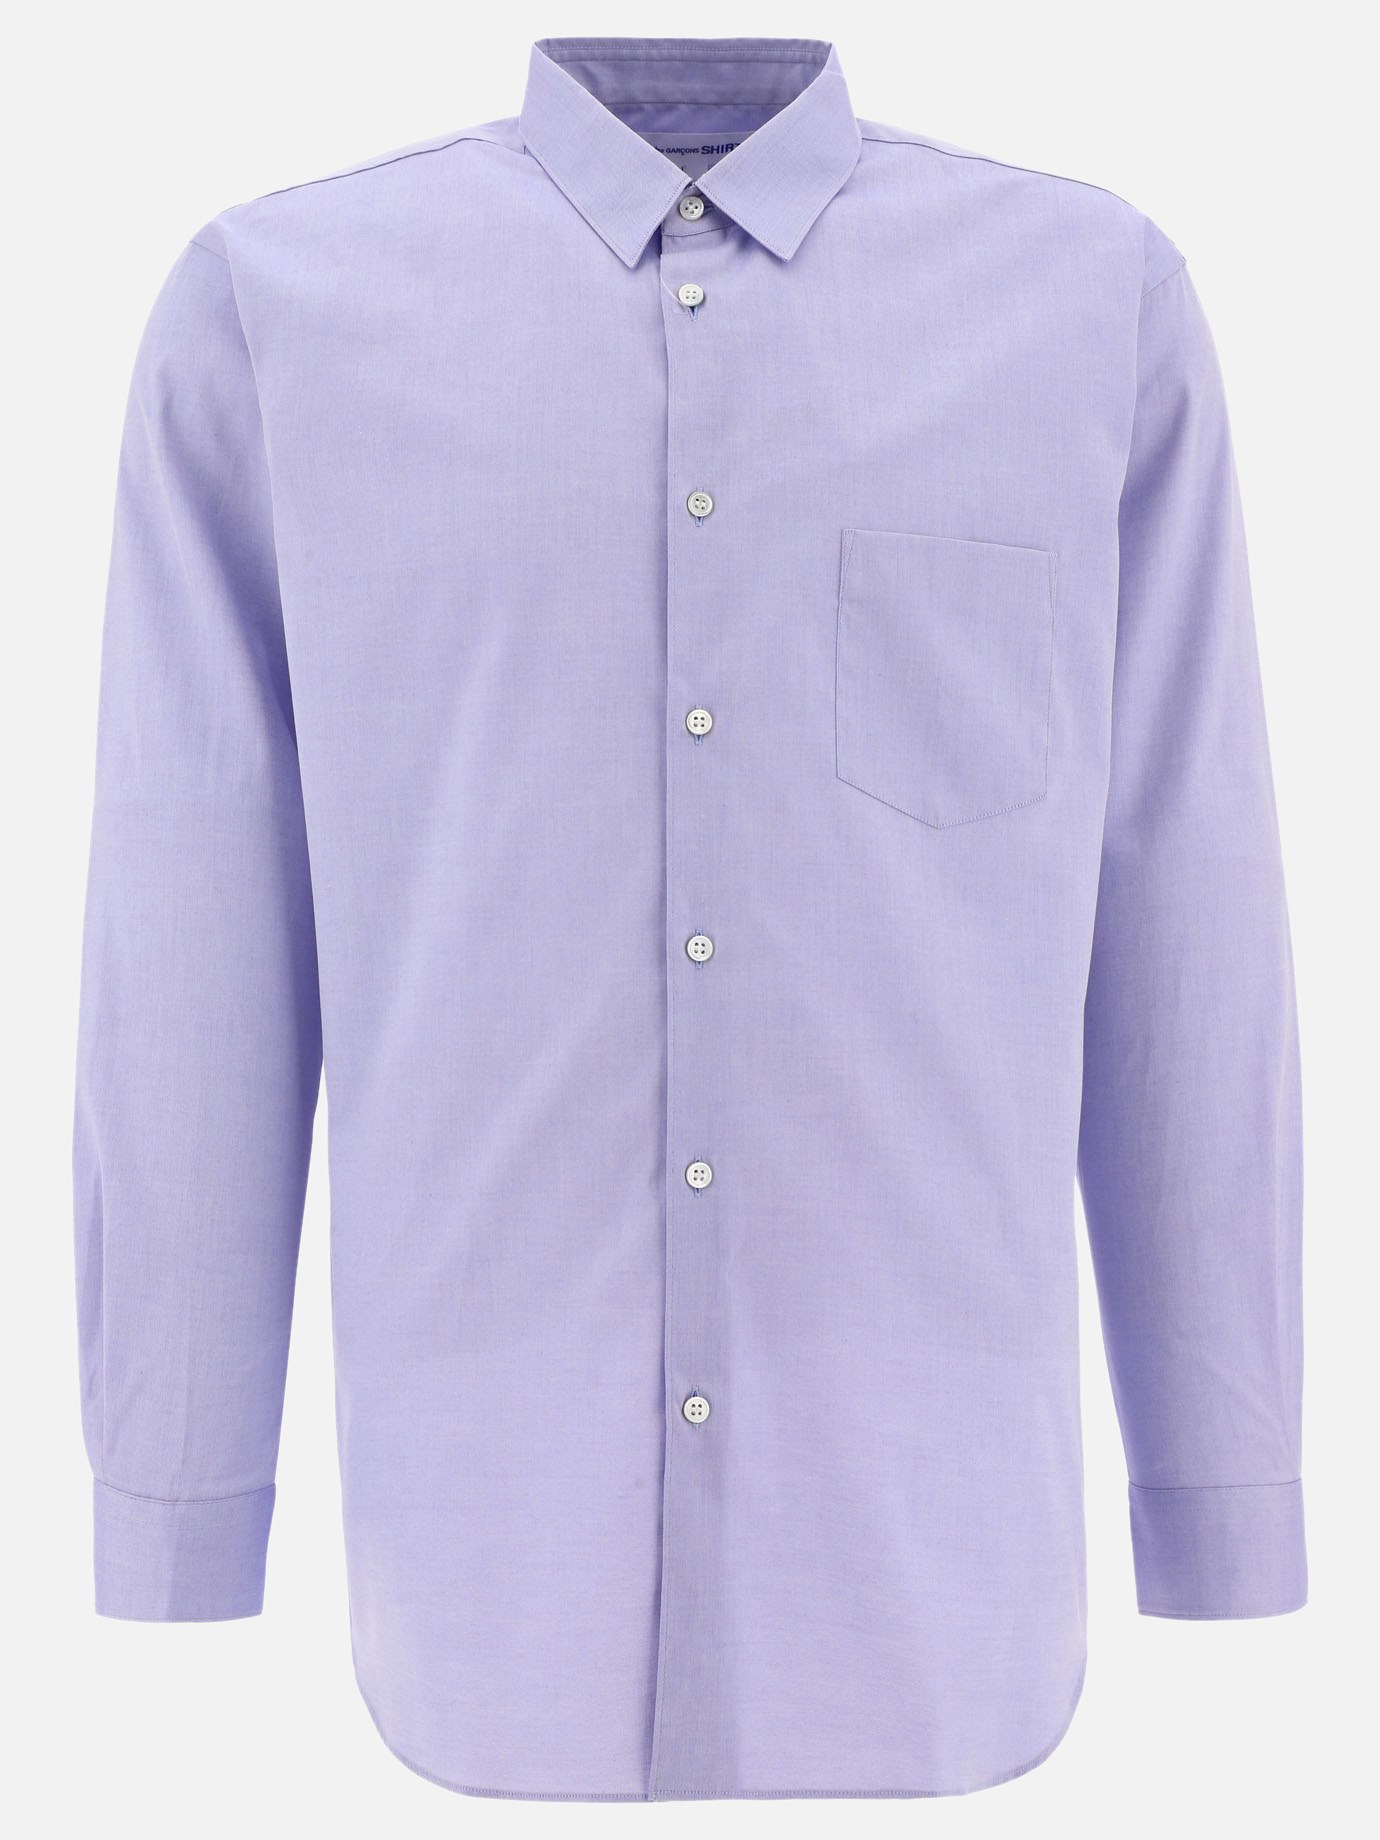 Oxford shirt with breast pocket